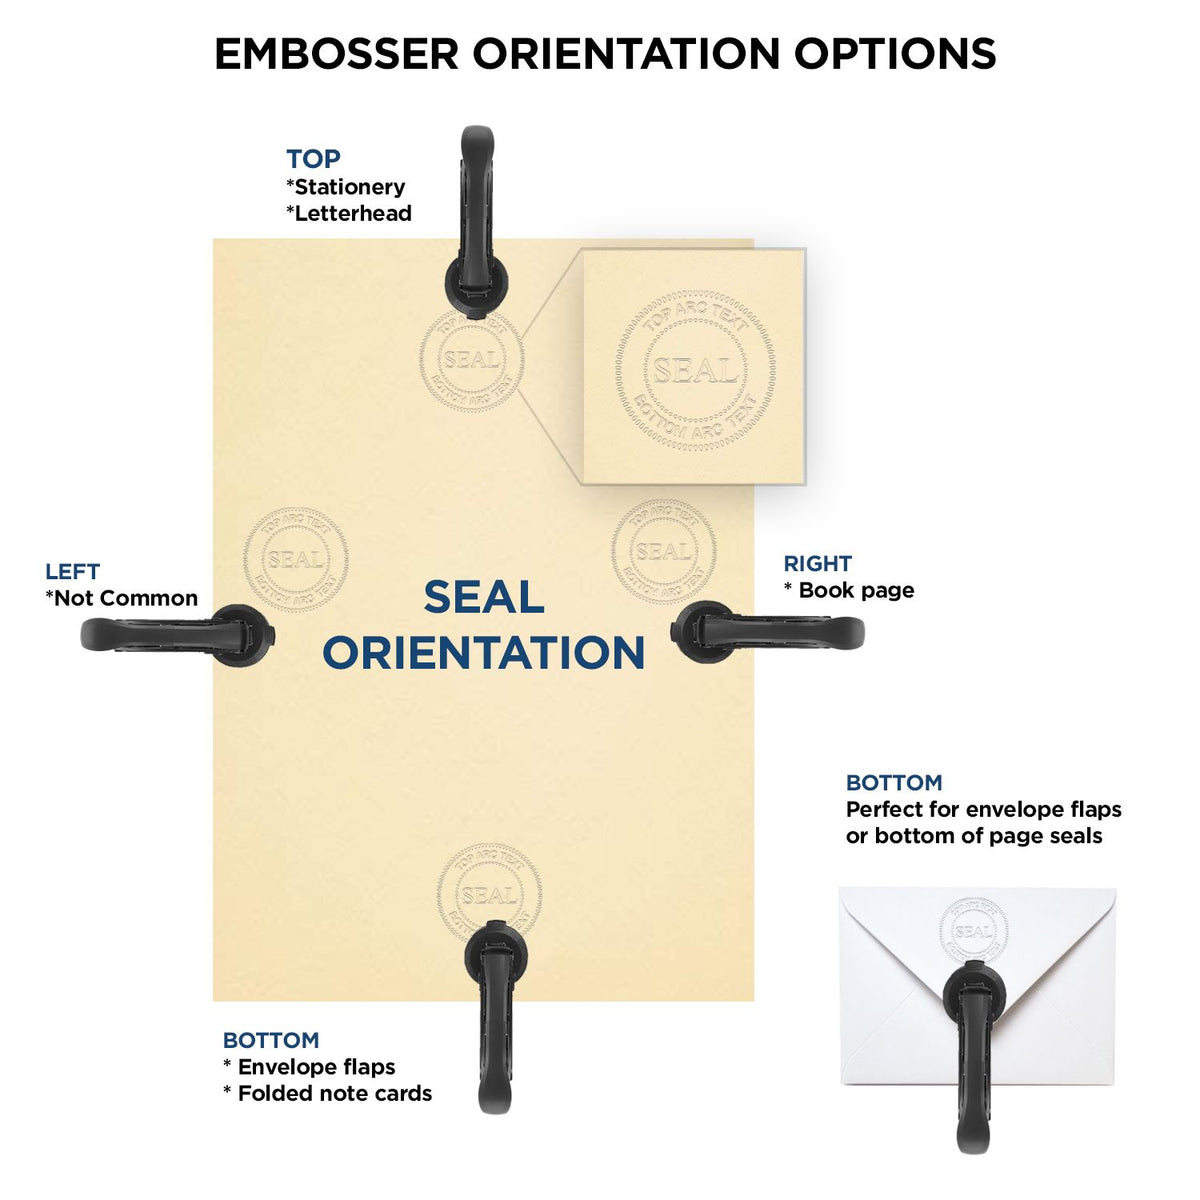 An infographic for the Handheld Guam Land Surveyor Seal showing embosser orientation, this is showing examples of a top, bottom, right and left insert.